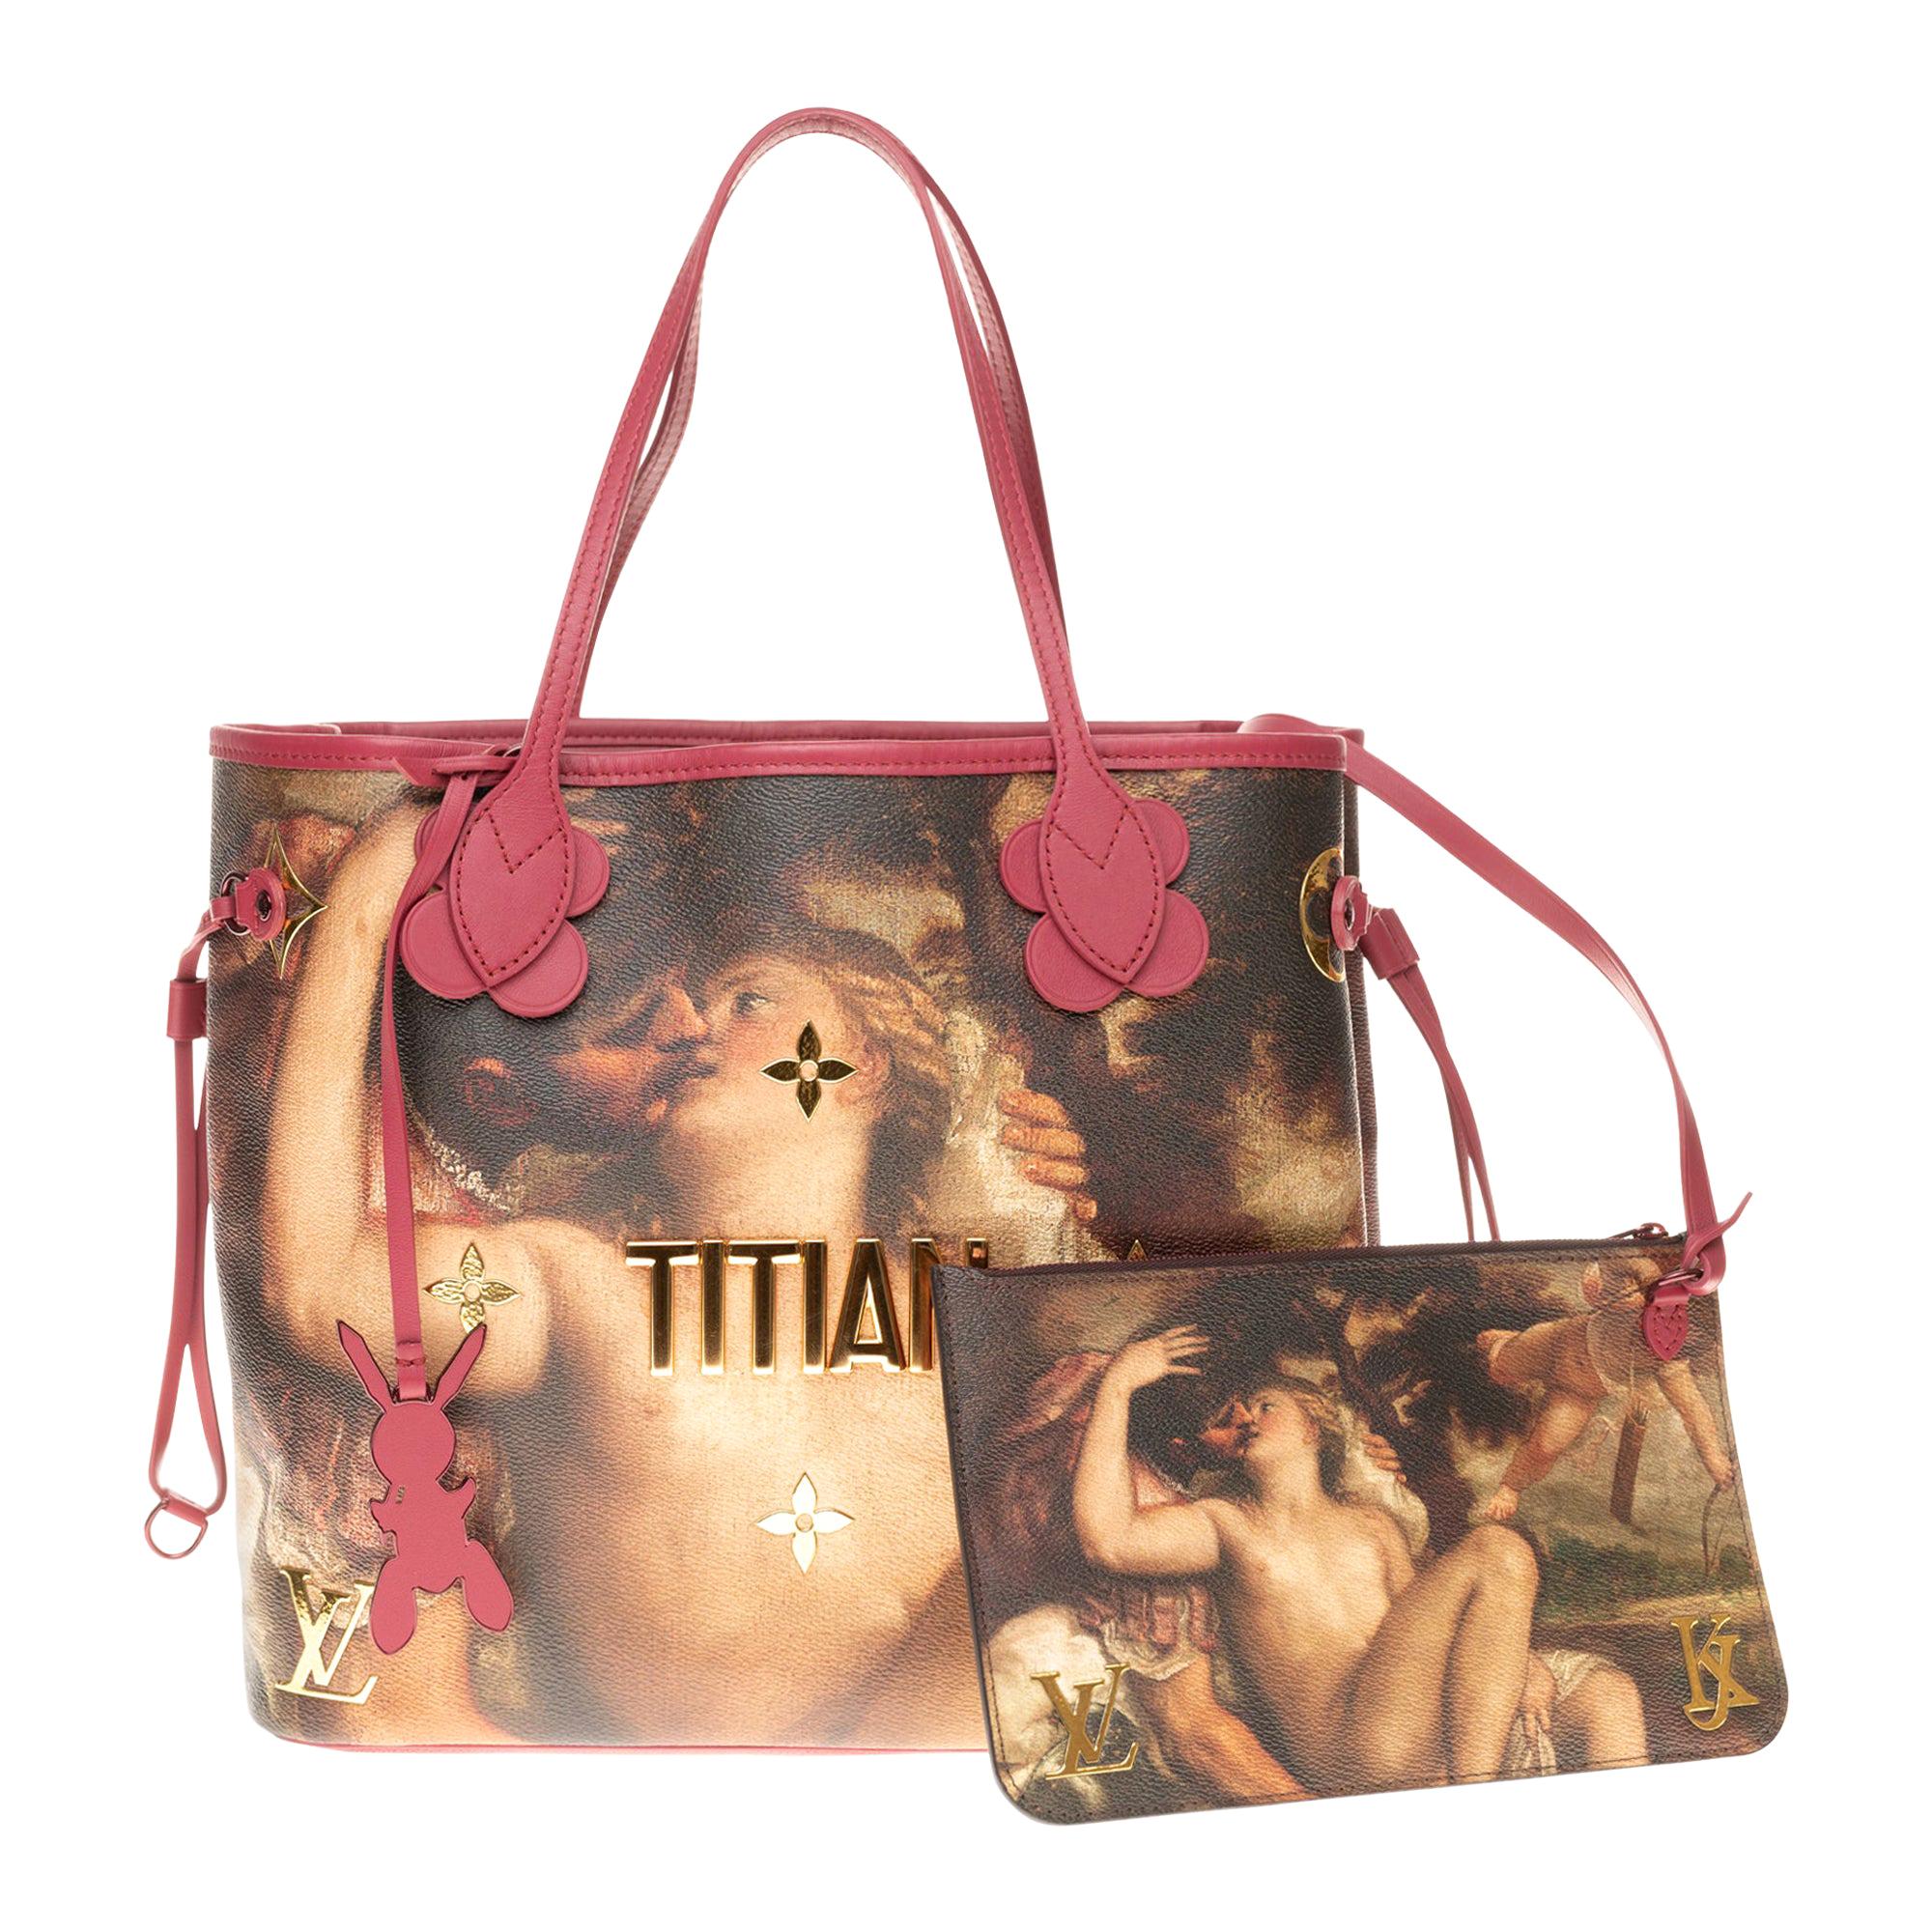 Louis Vuitton Neverfull handbag limited edition  Titian by Jeff Koons 